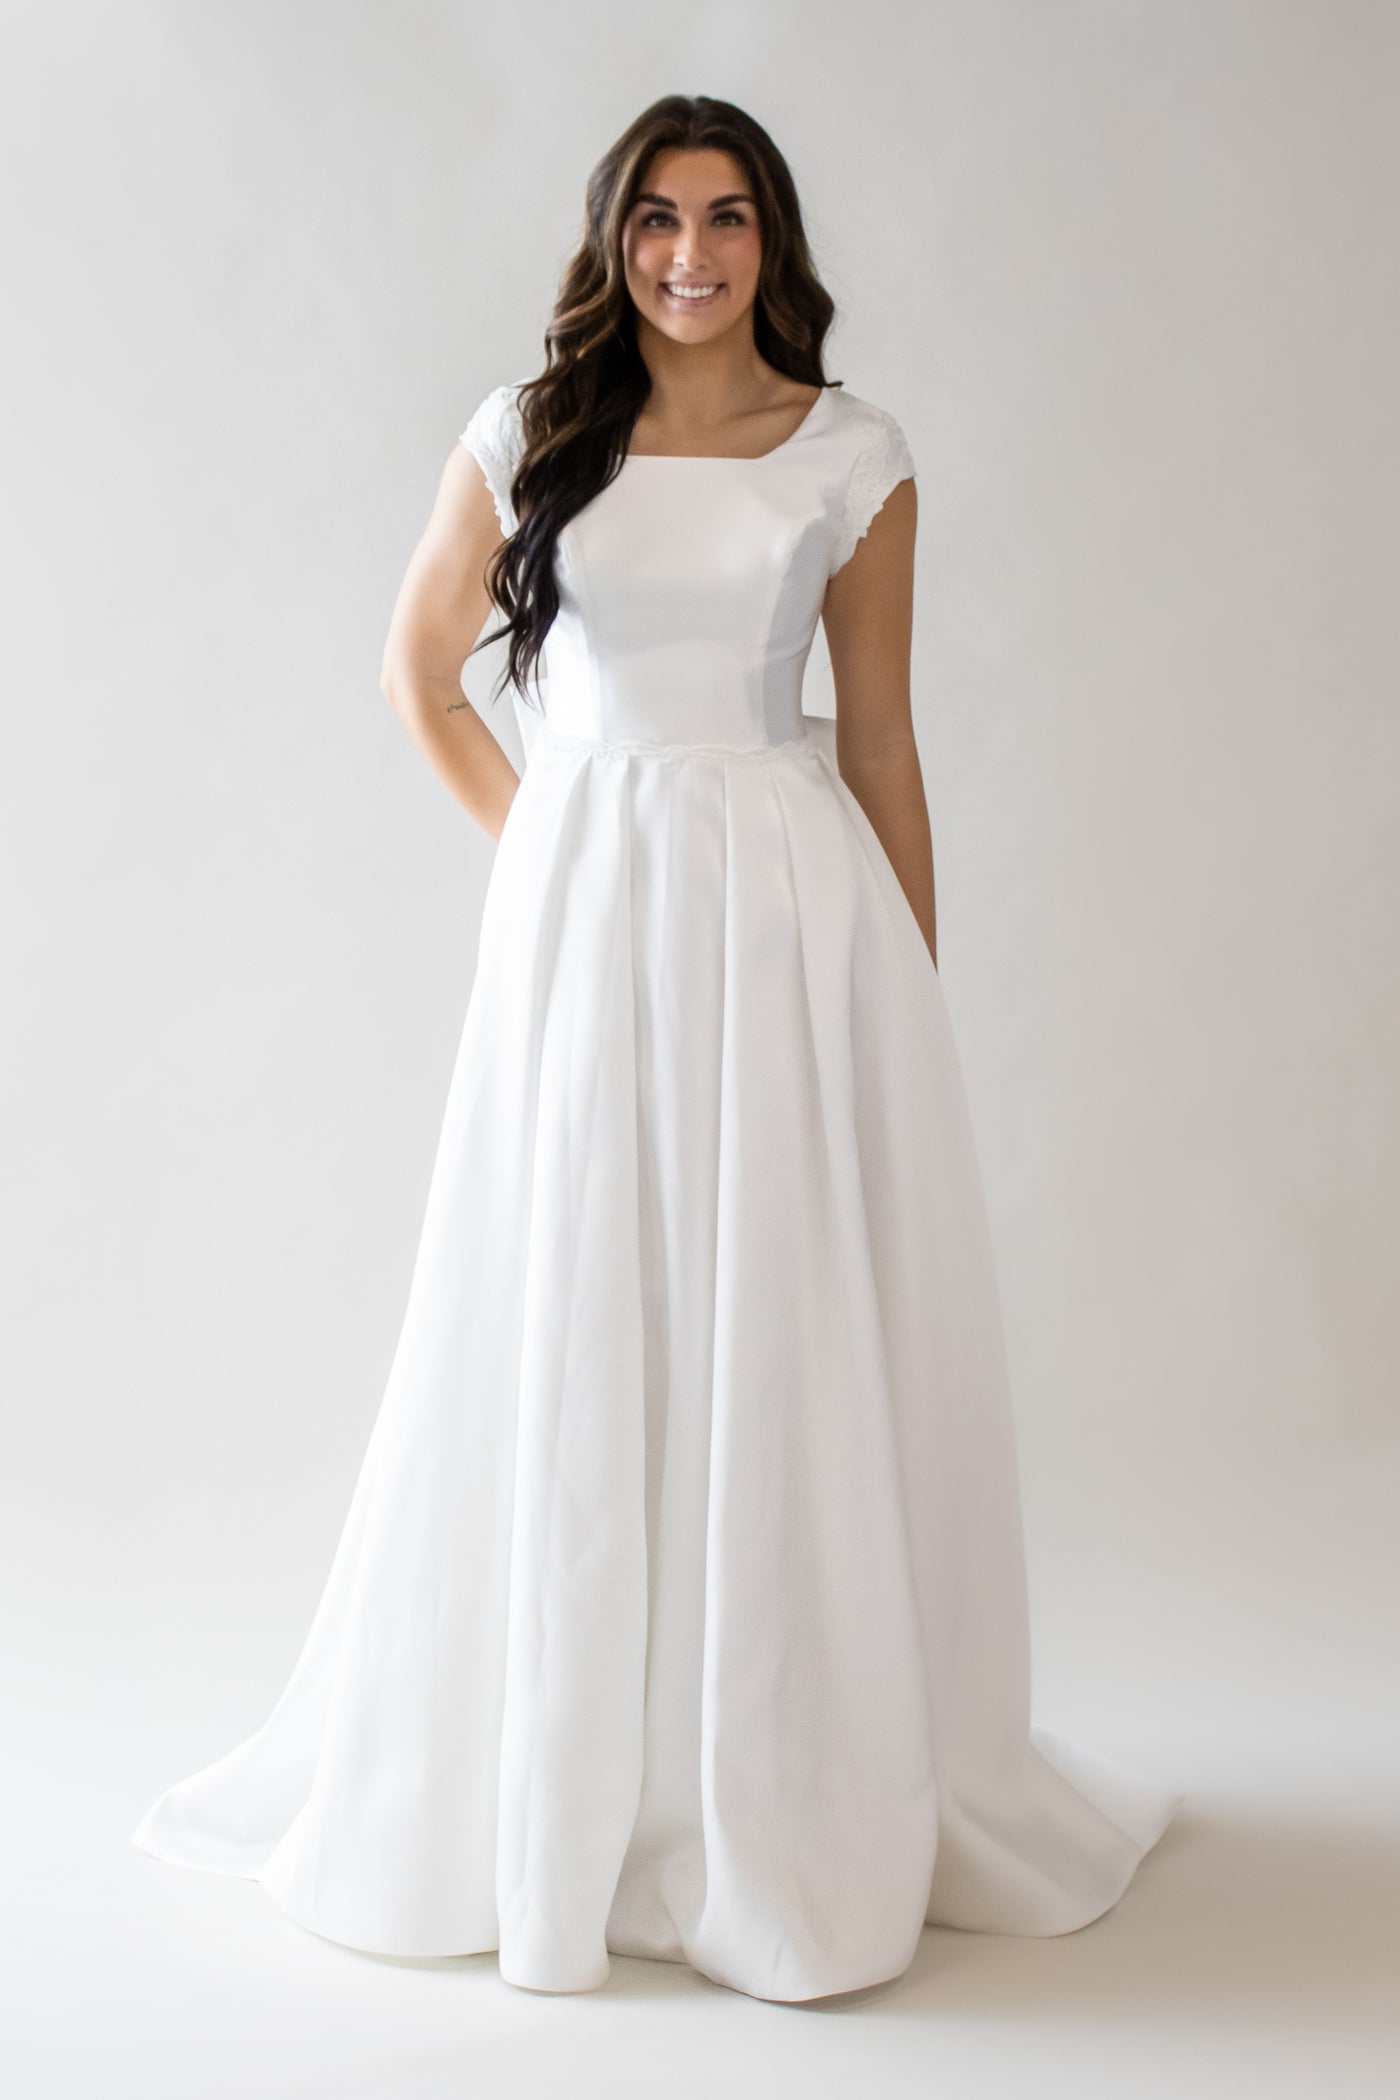 This is a modest wedding dress with an a-line skirt and pearl trip details.